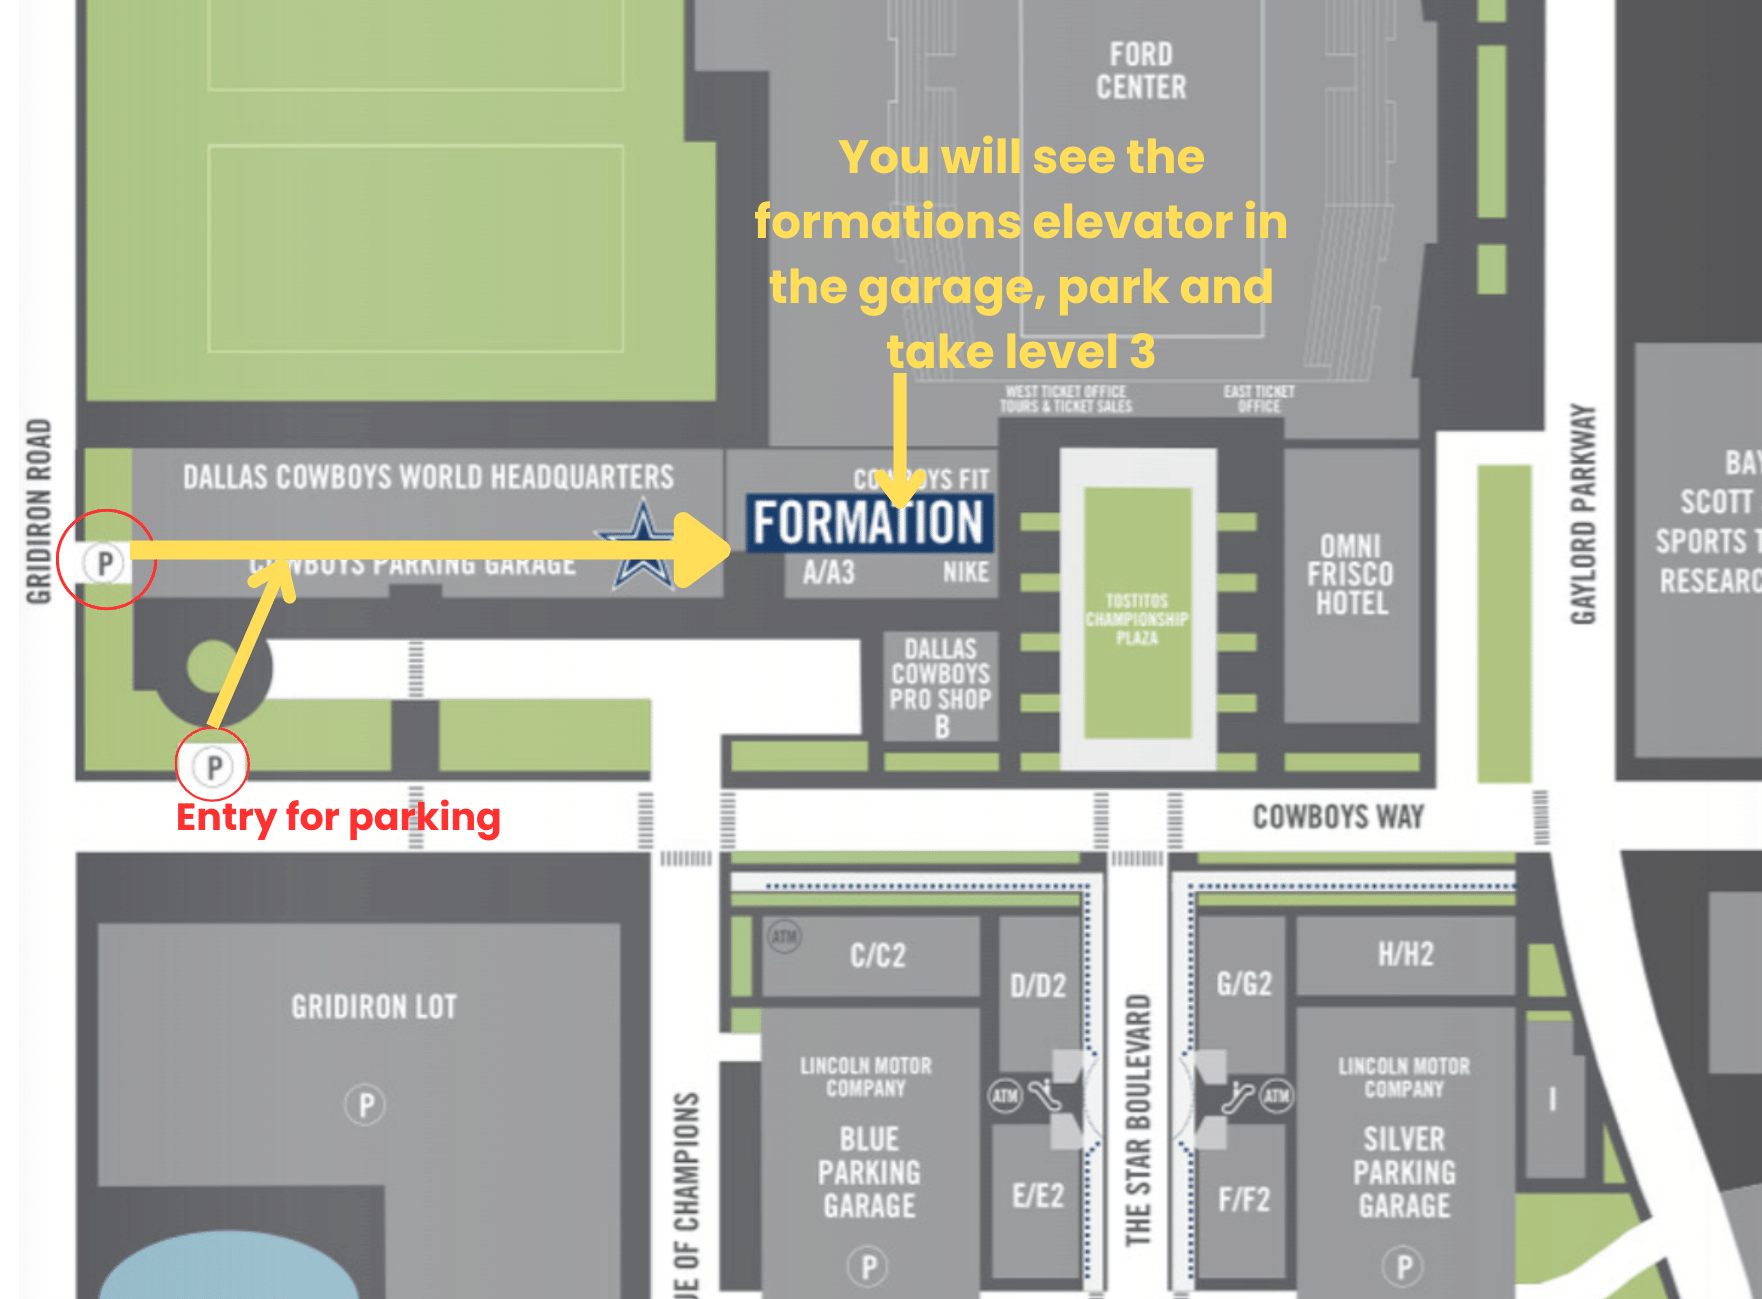  A map of the Dallas Cowboys World Headquarters in Dallas, Texas, showing the entrance for parking. 